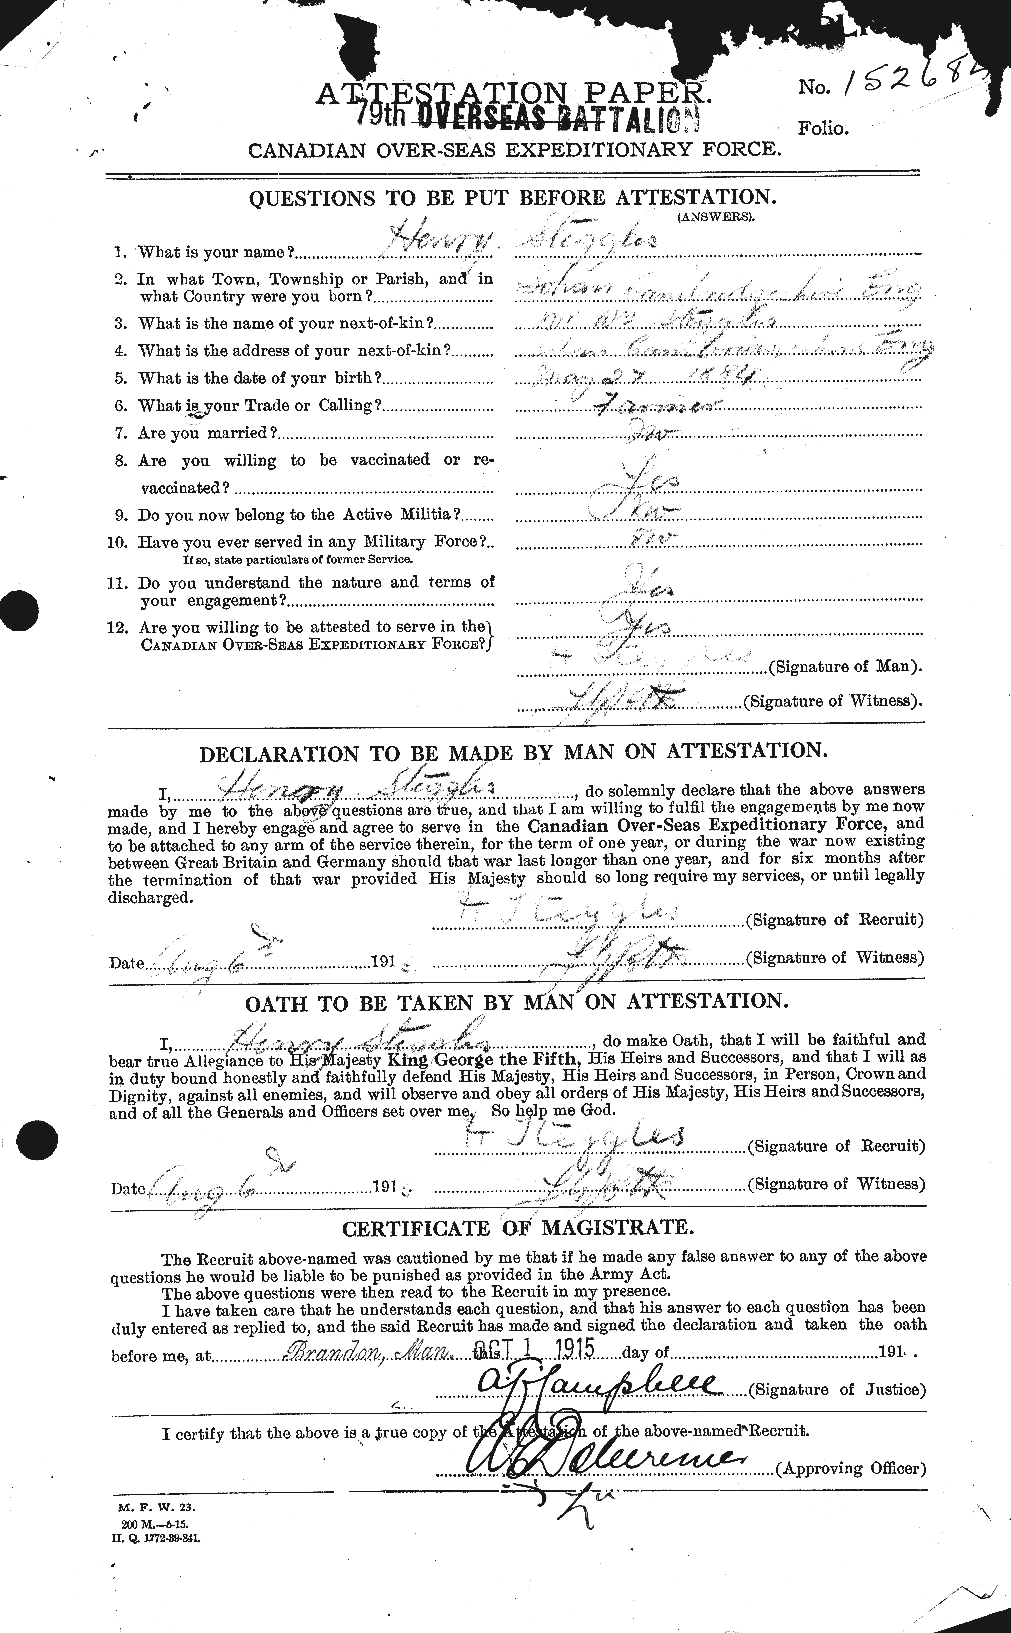 Personnel Records of the First World War - CEF 119318a